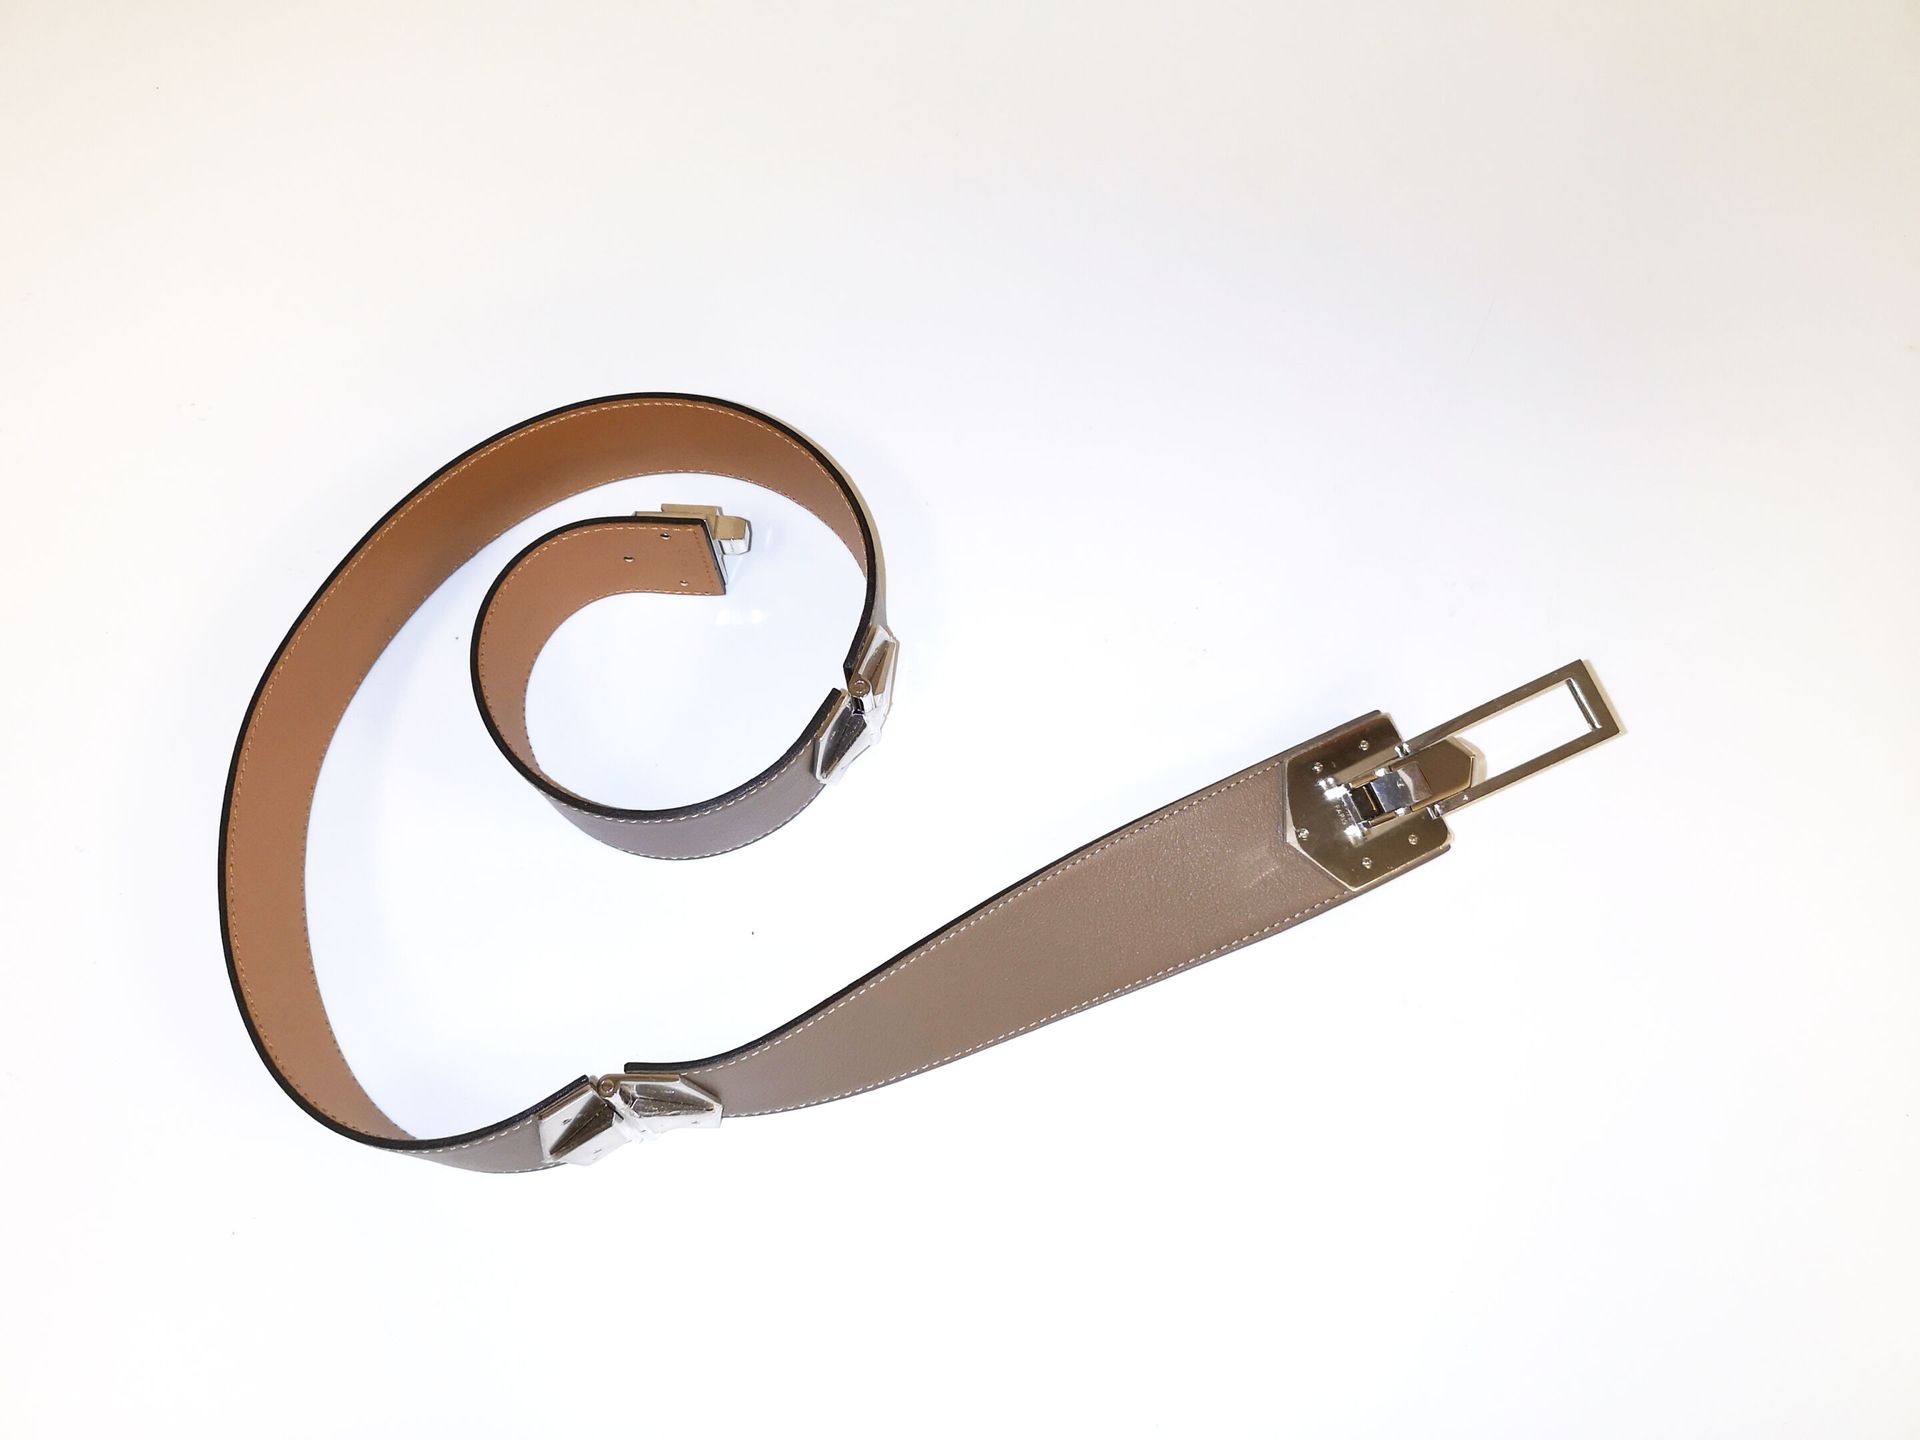 HERMES Paris, Lady's belt in smooth taupe leather with camel interior and white &hellip;